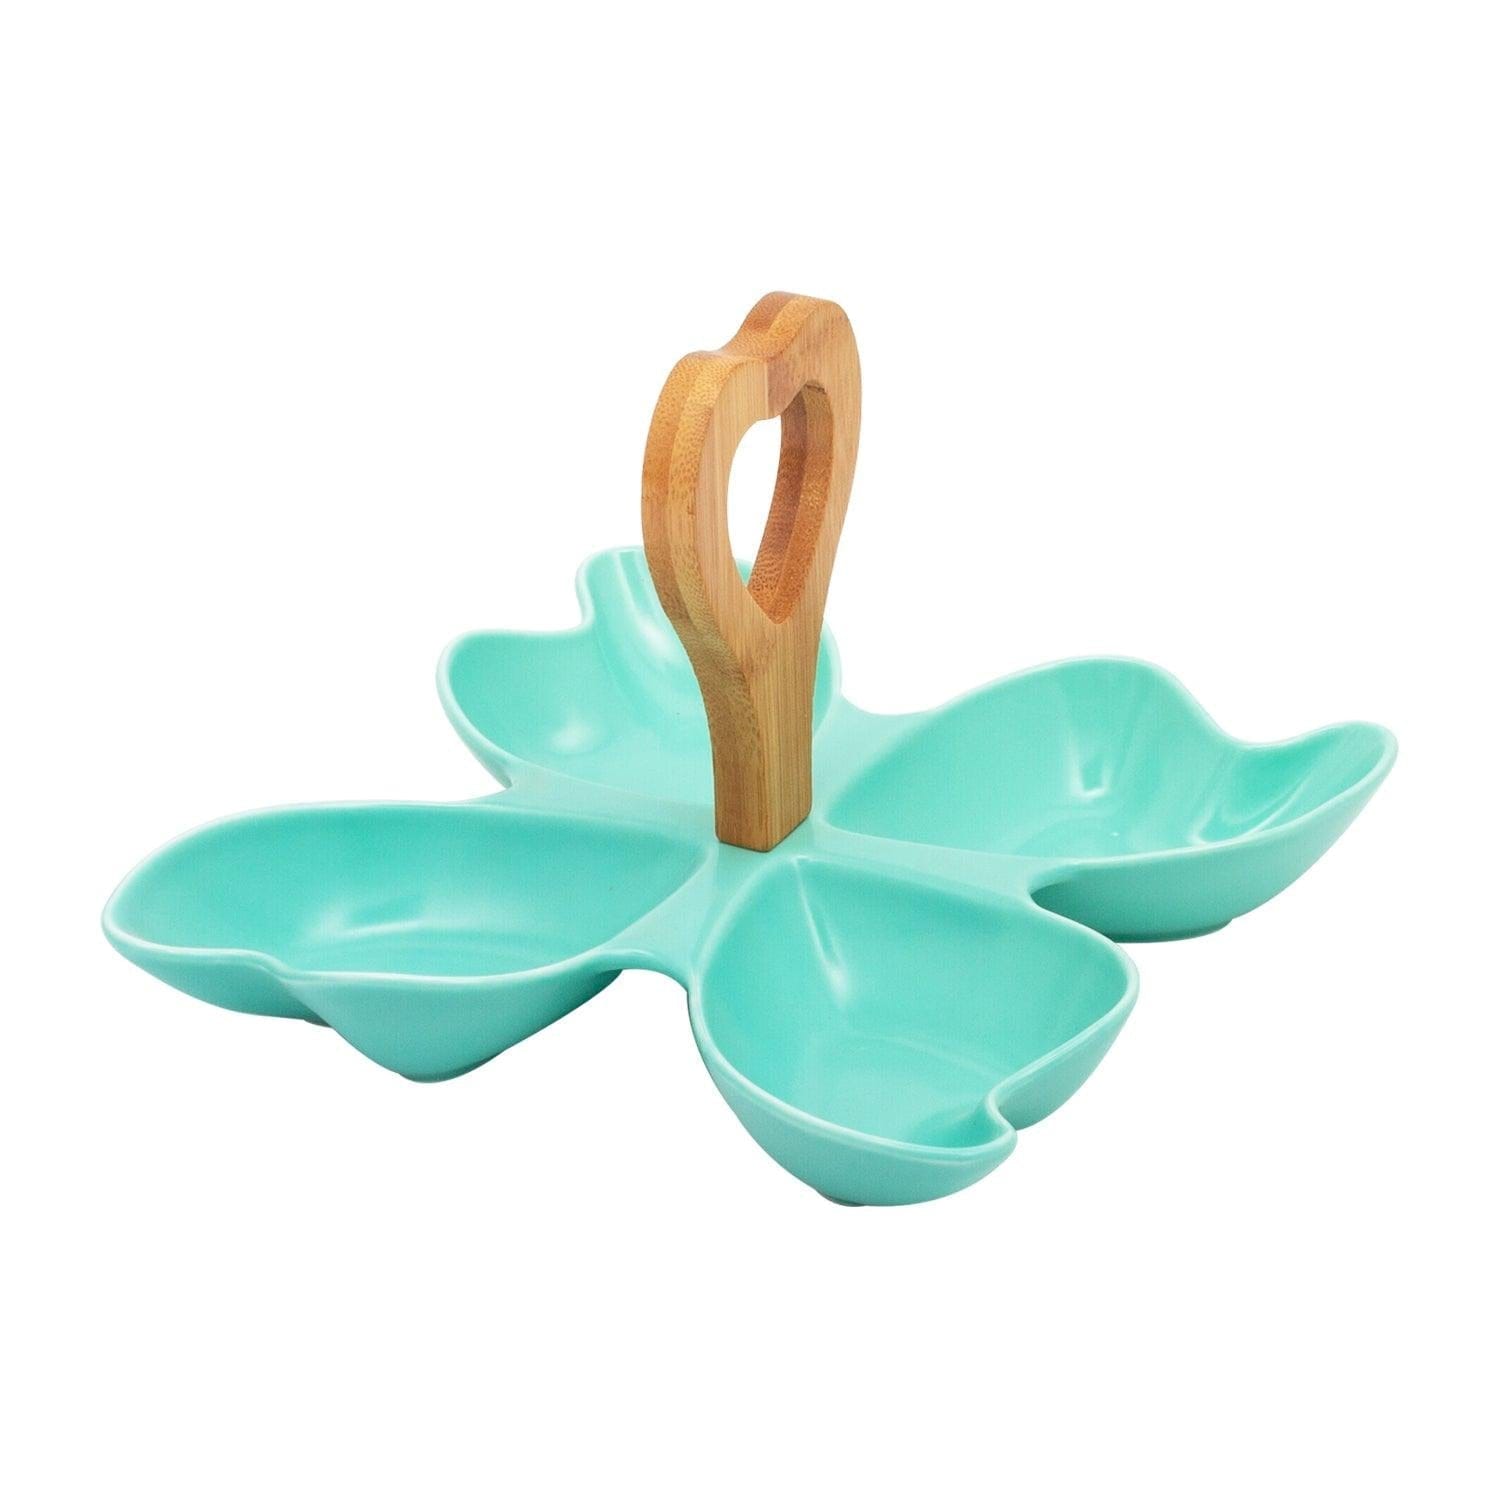 4 Compartment Leafy Green Ceramic Serving Platter with Wooden Handle